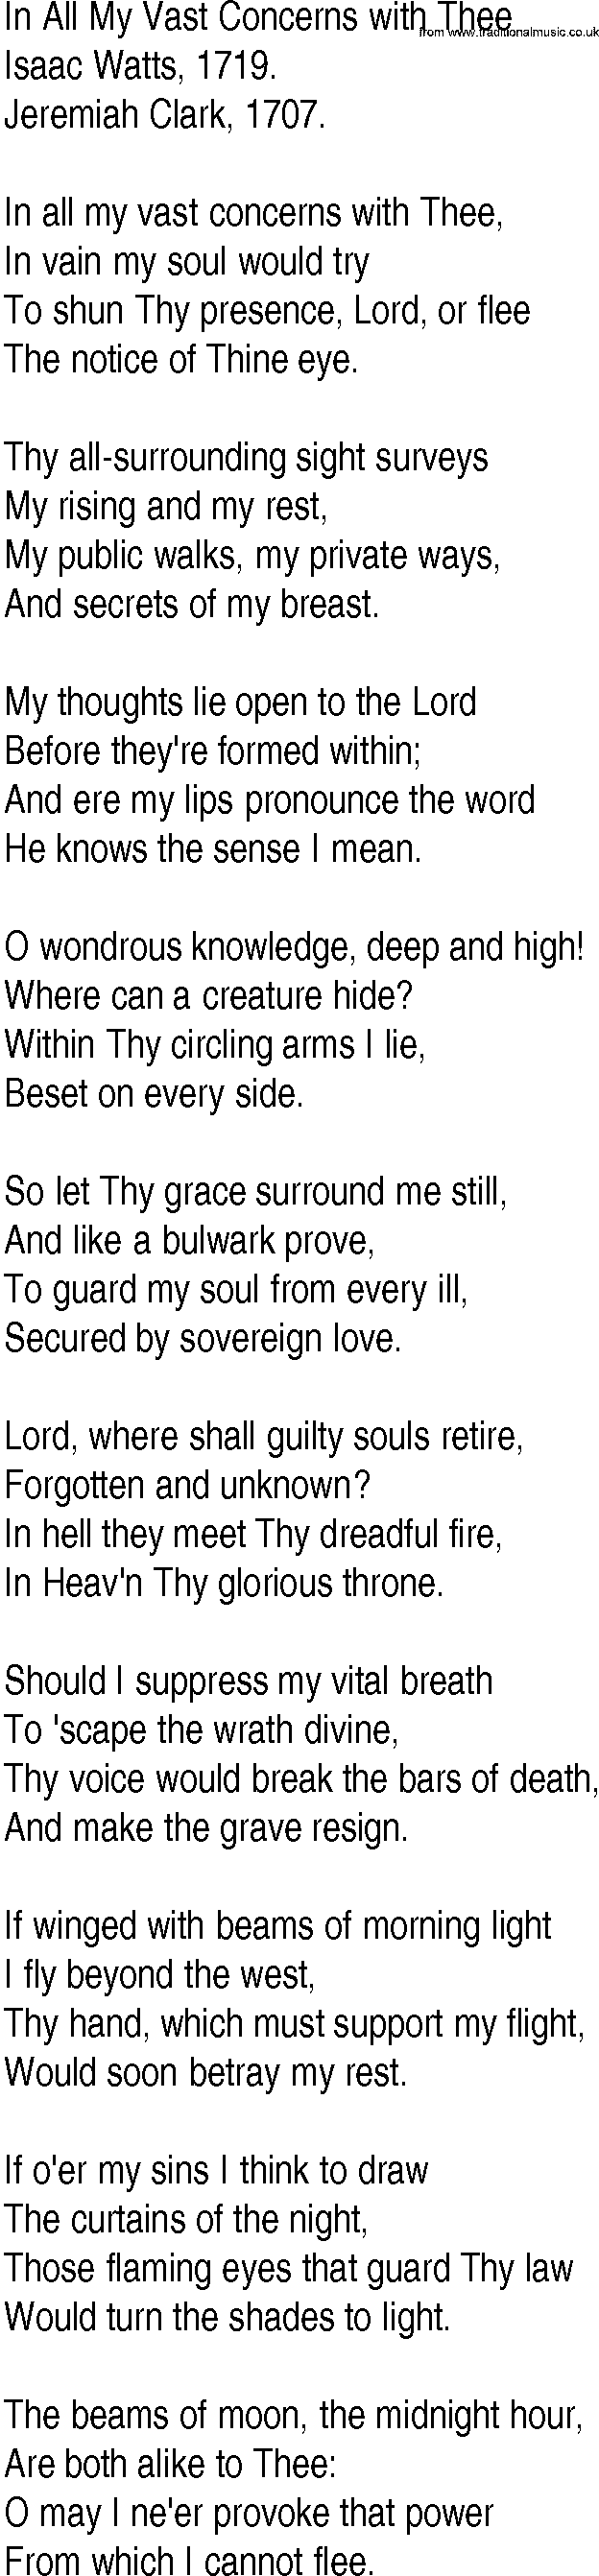 Hymn and Gospel Song: In All My Vast Concerns with Thee by Isaac Watts lyrics